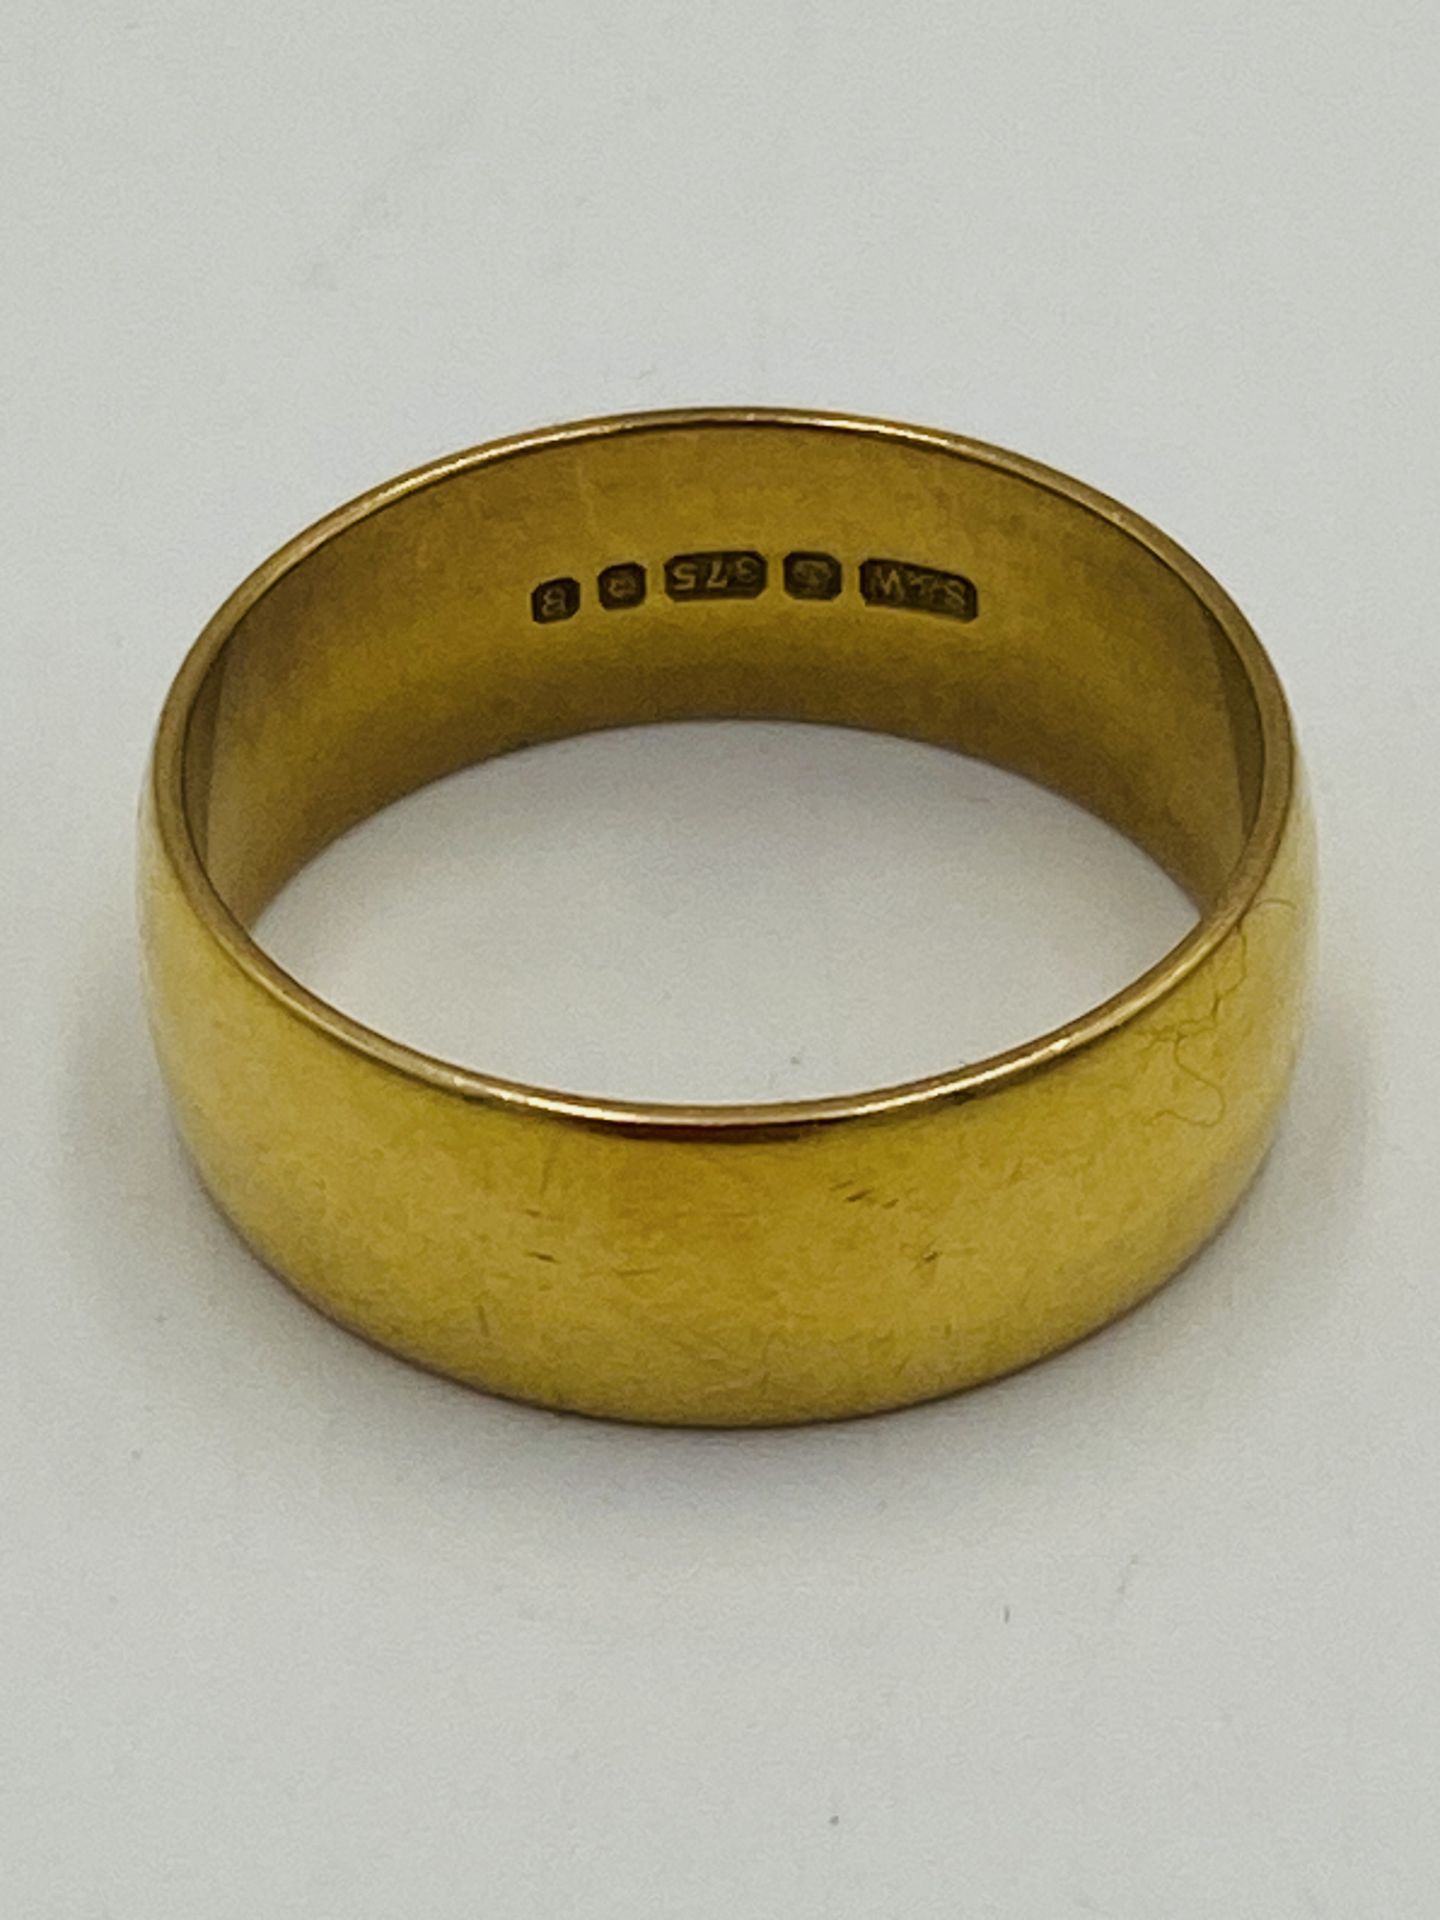 9ct gold band - Image 4 of 5